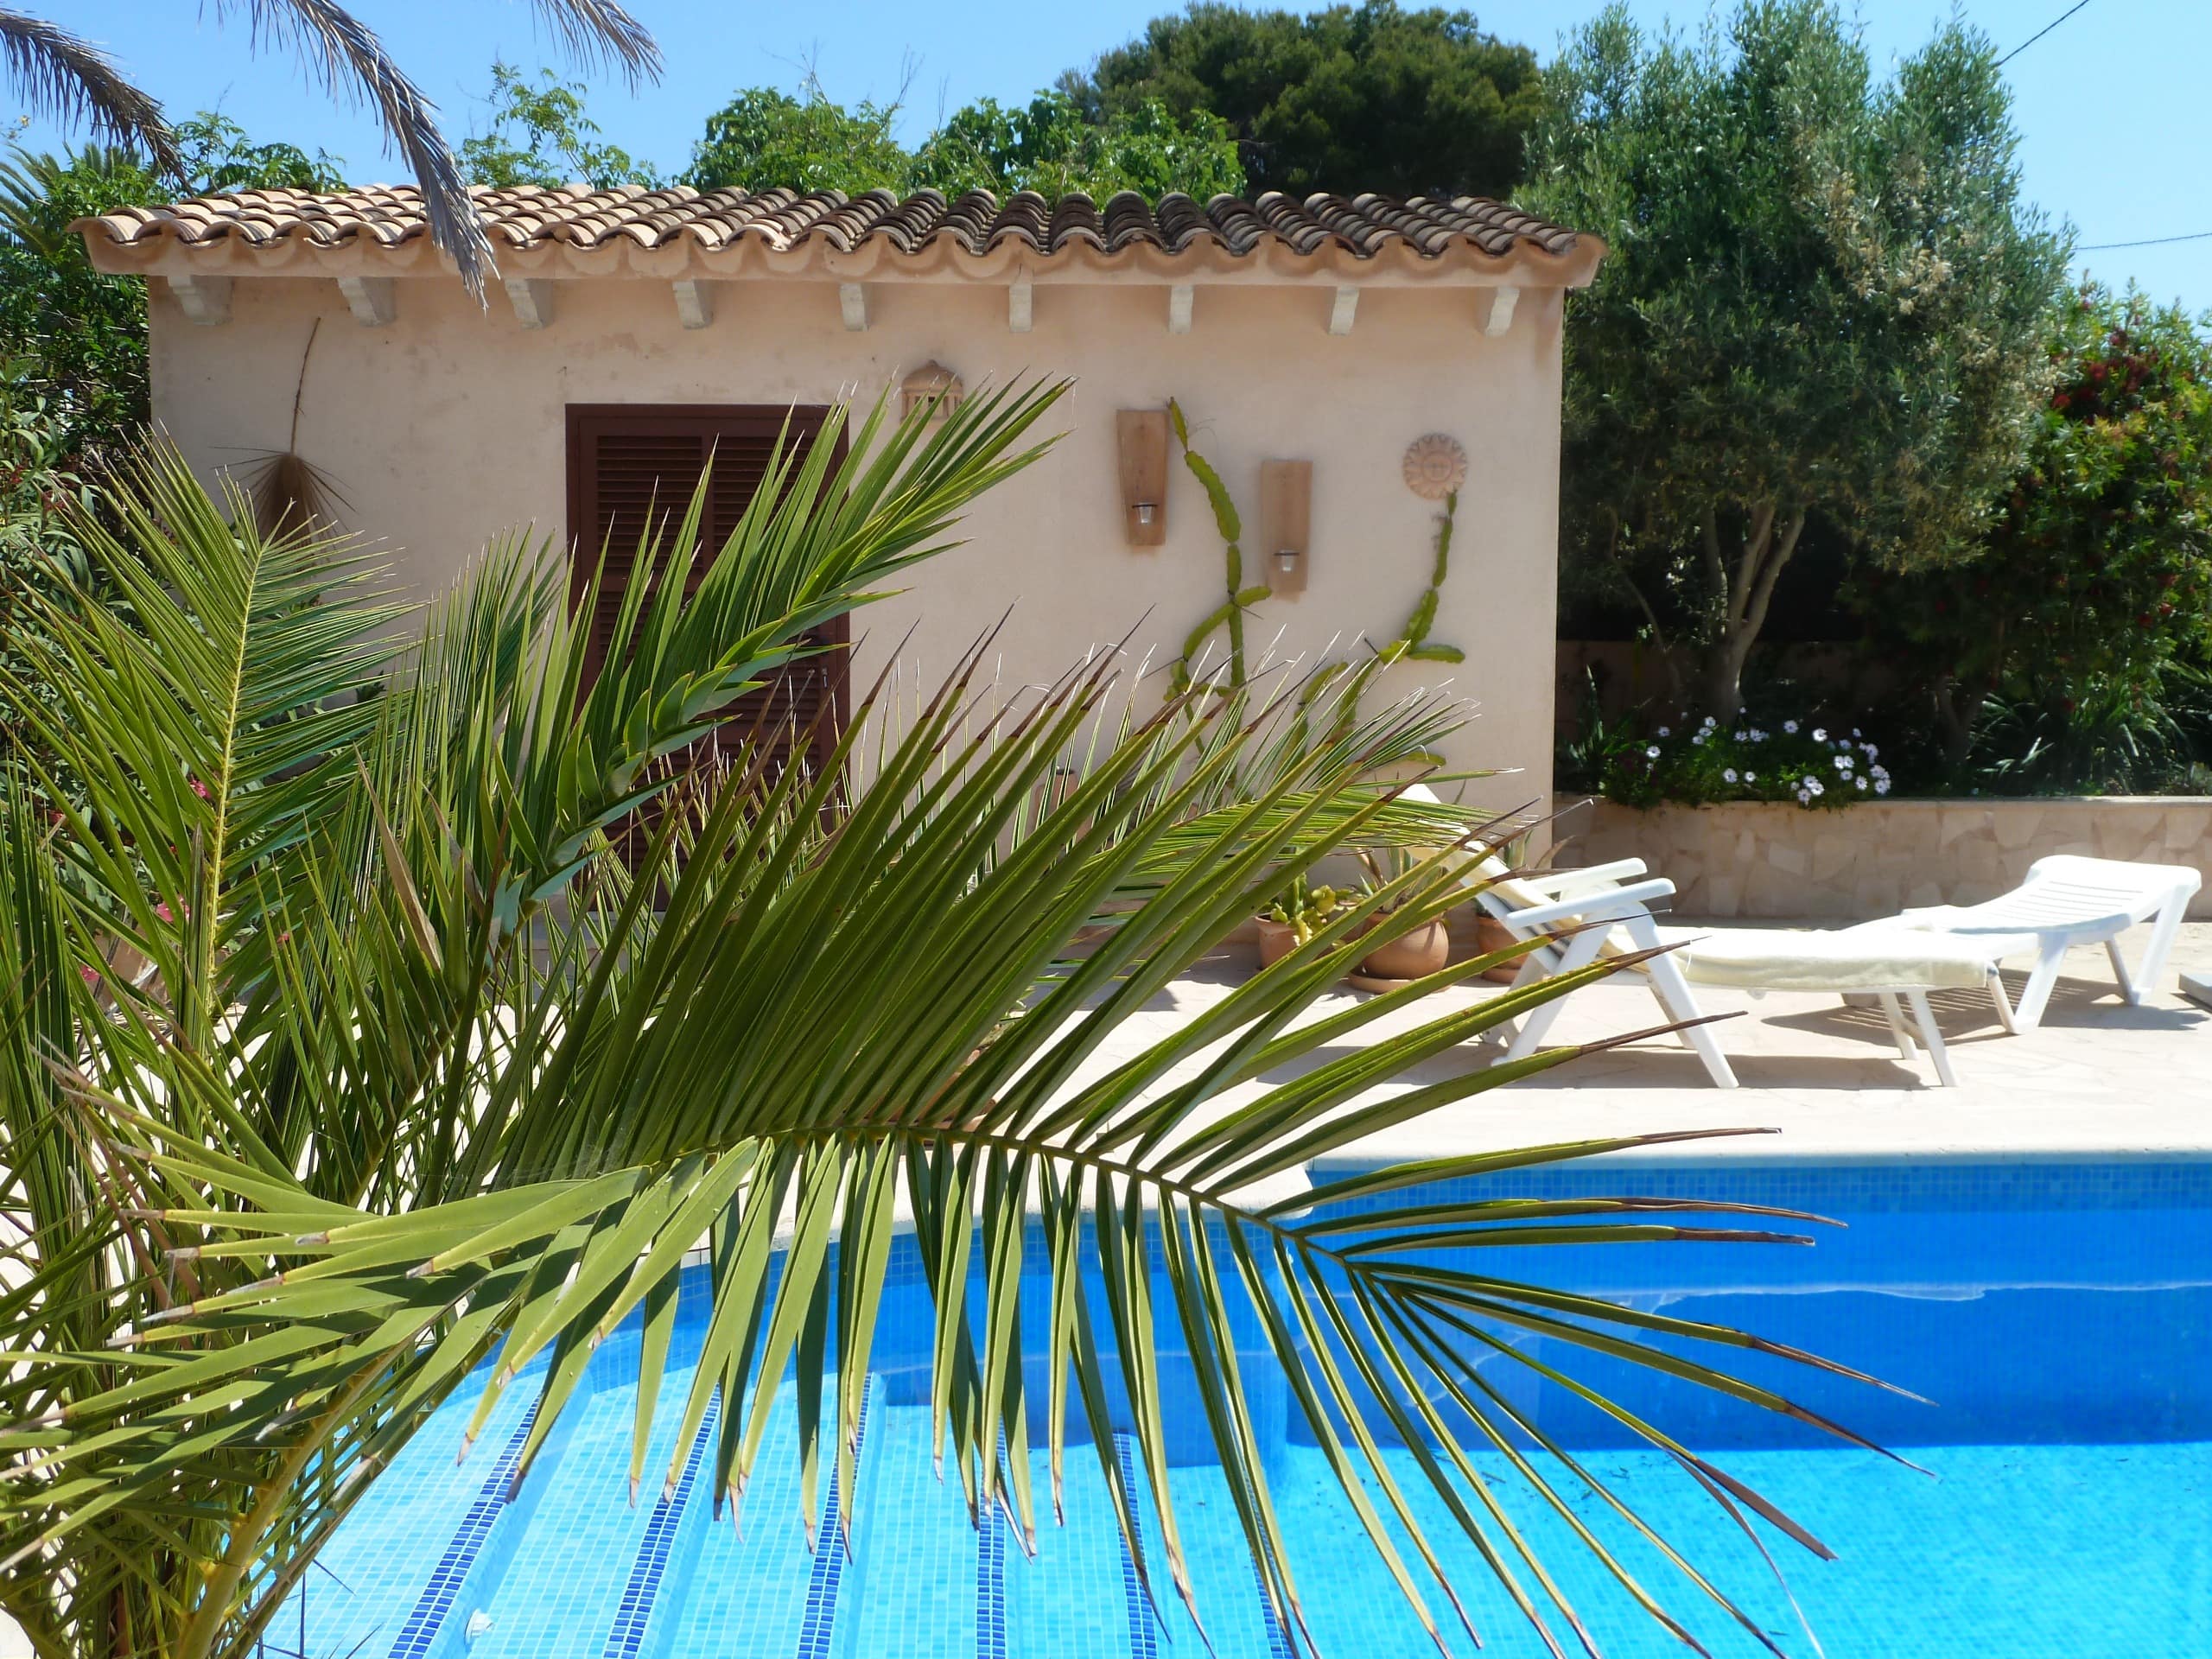 Villa in Spain with a private pool set in a finca